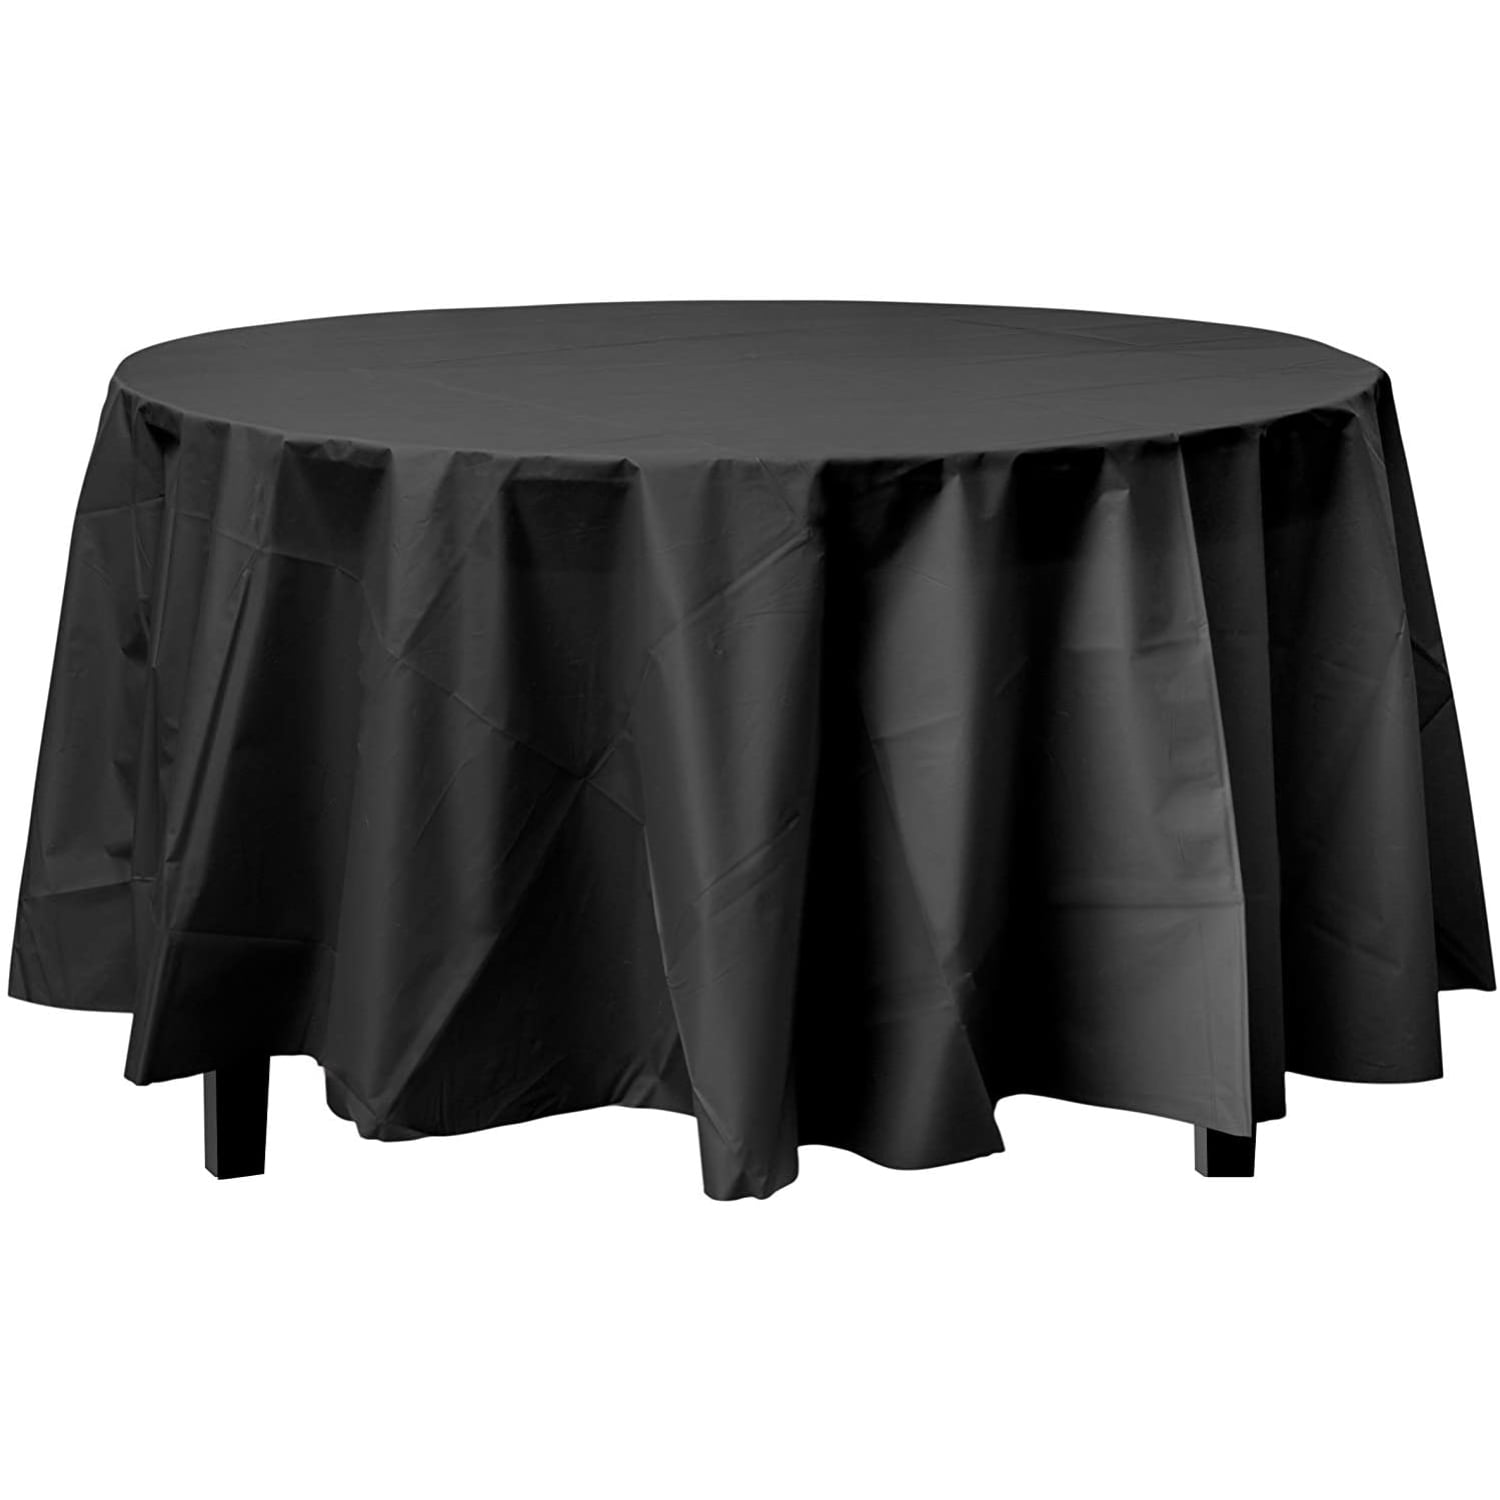 Exquisite 84 Round Tablecloth Cover, Round Table Covers Party City